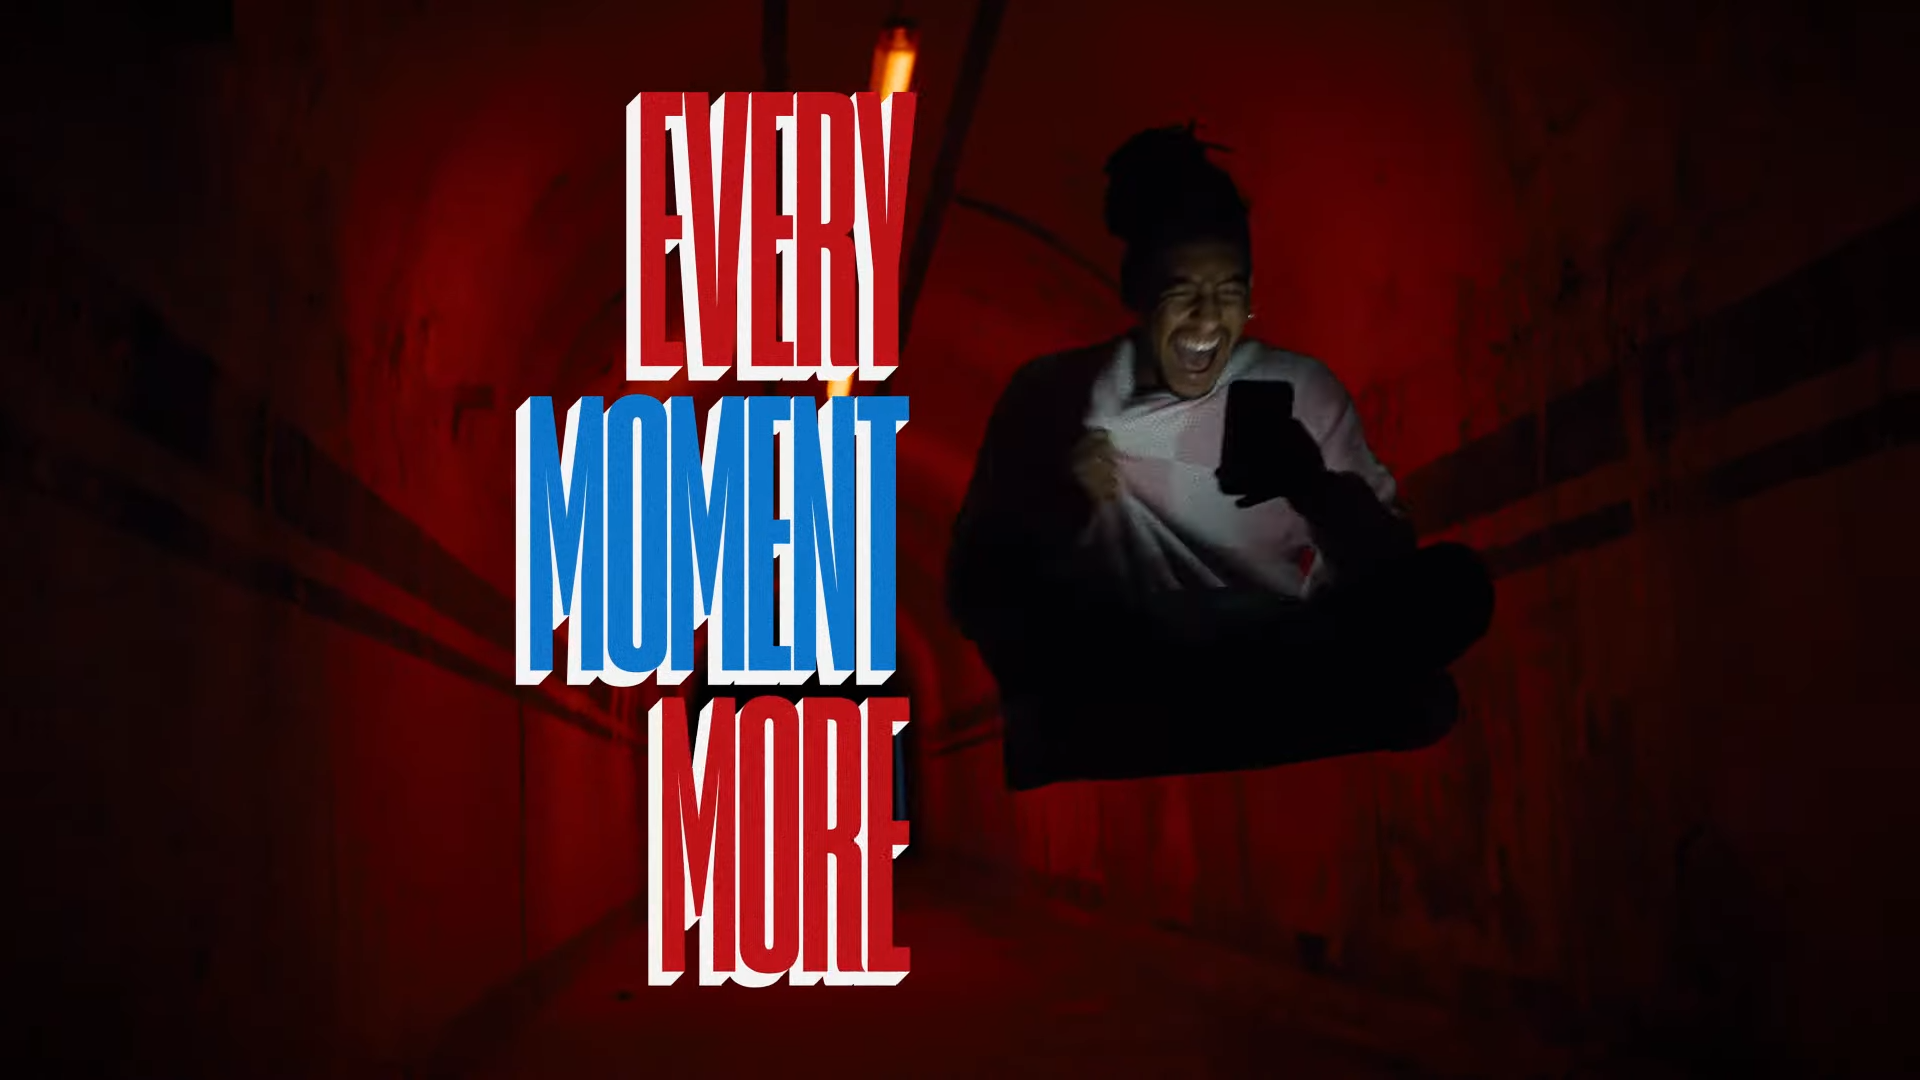 A man laughing at his phone in excitement sits next to text that says "Every Moment More"